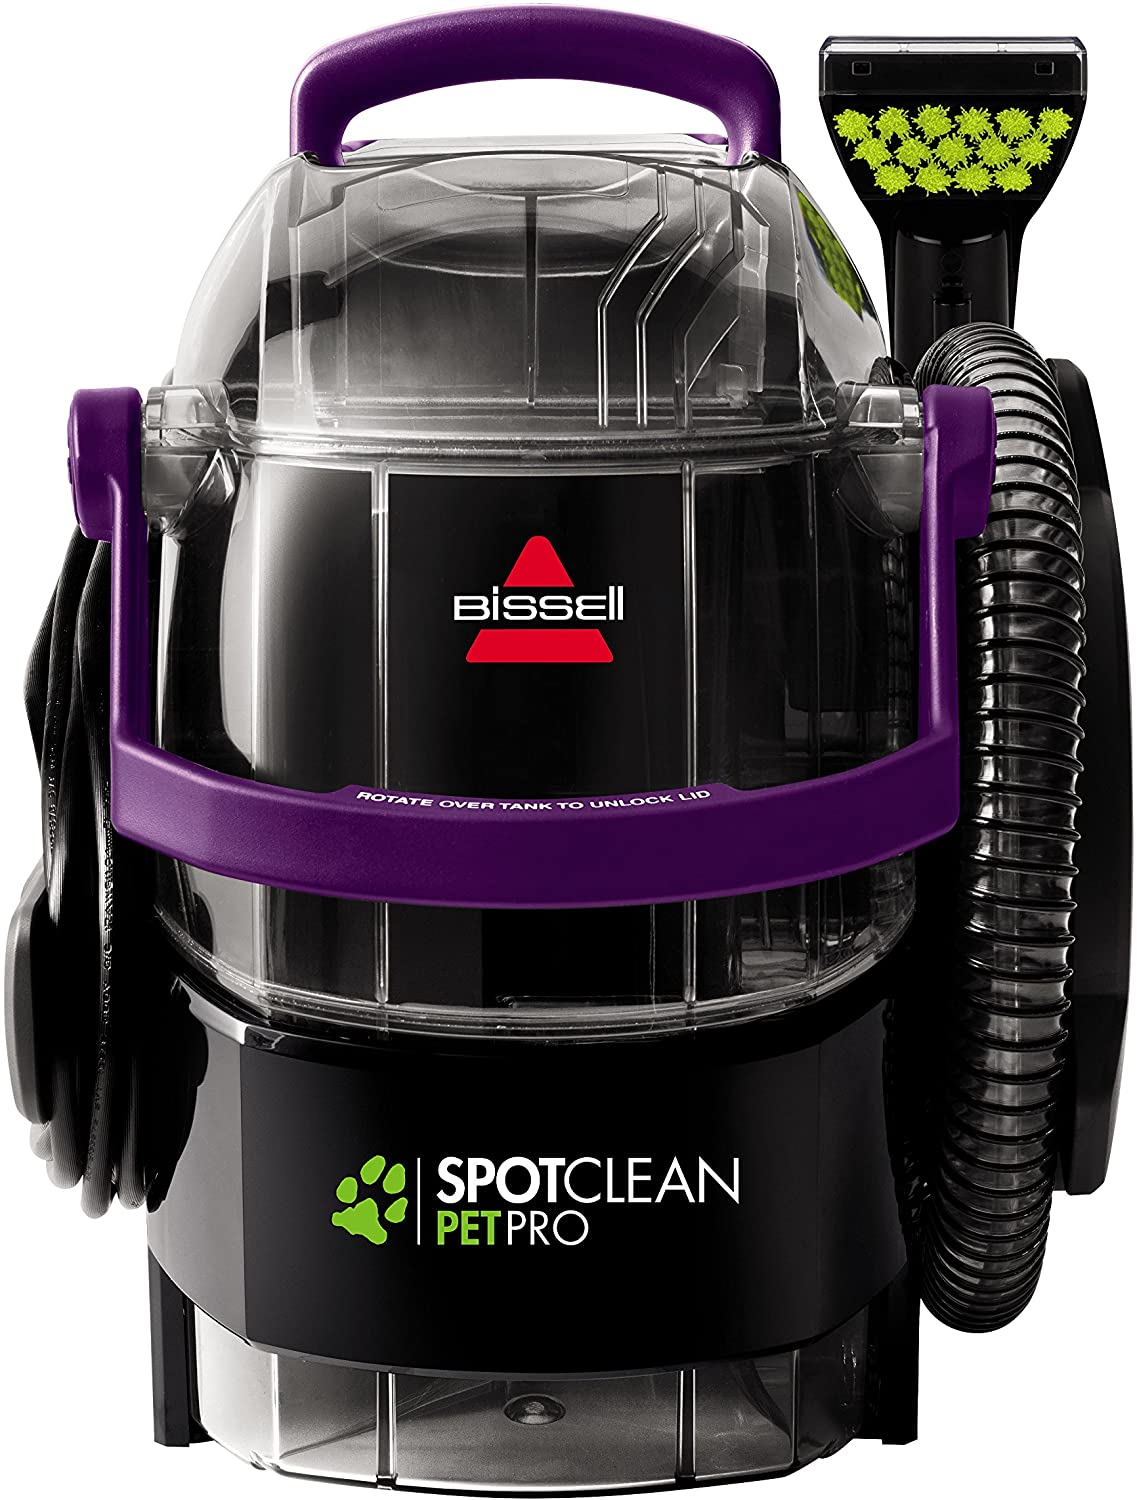 BISSELL SpotClean Pet Pro Portable Compact Upholstery Cleaner